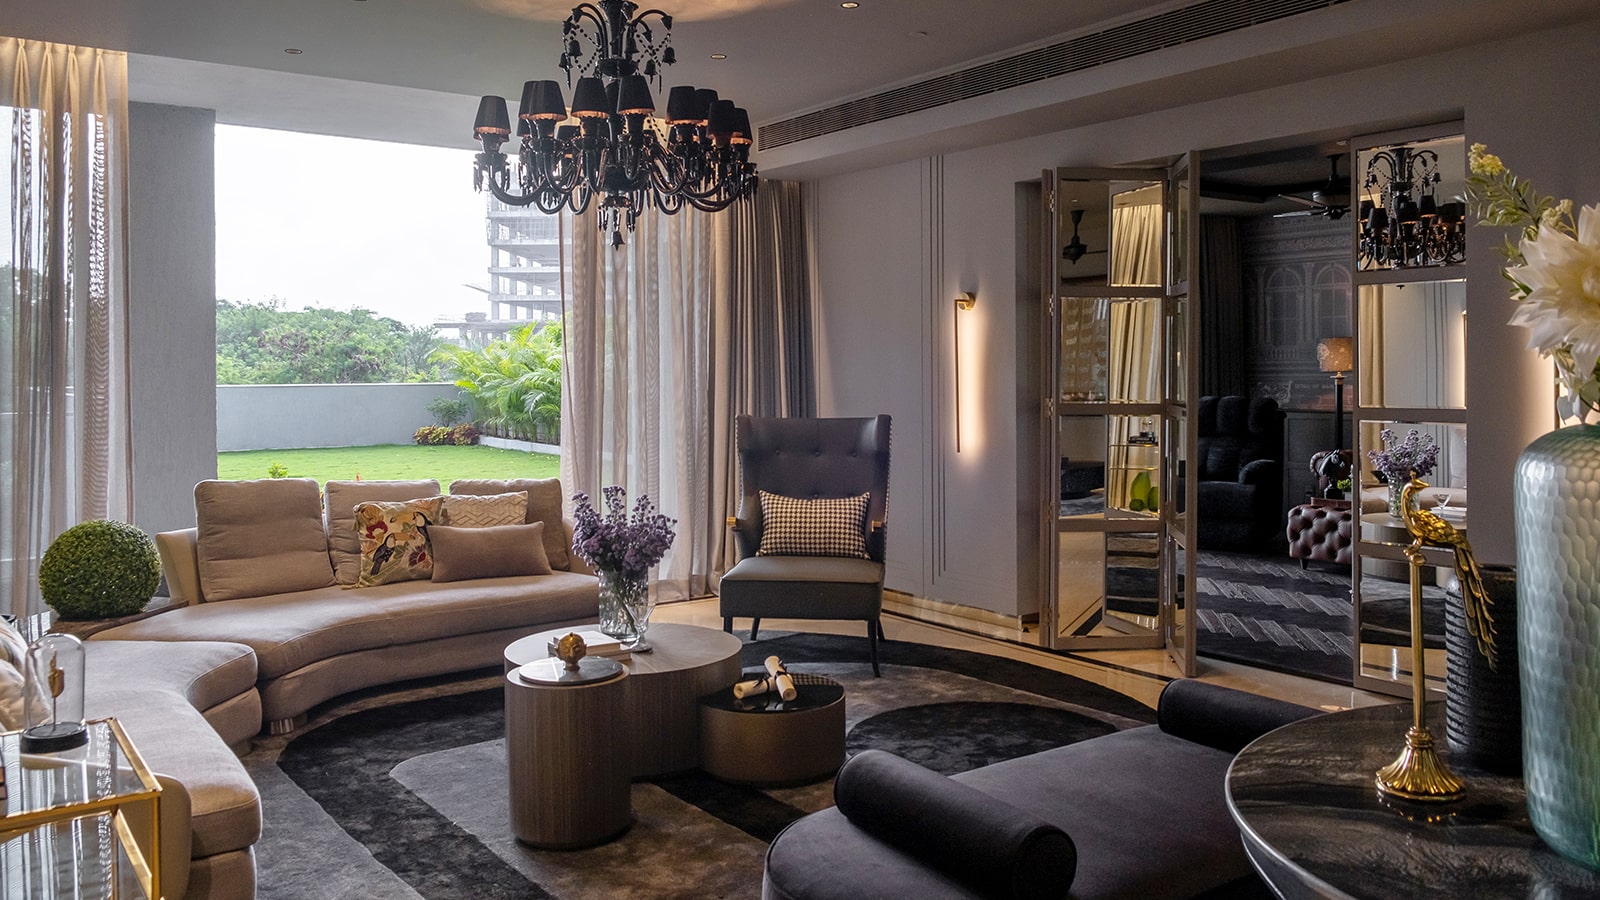 A luxury home in shades of grey! » India Art N Design